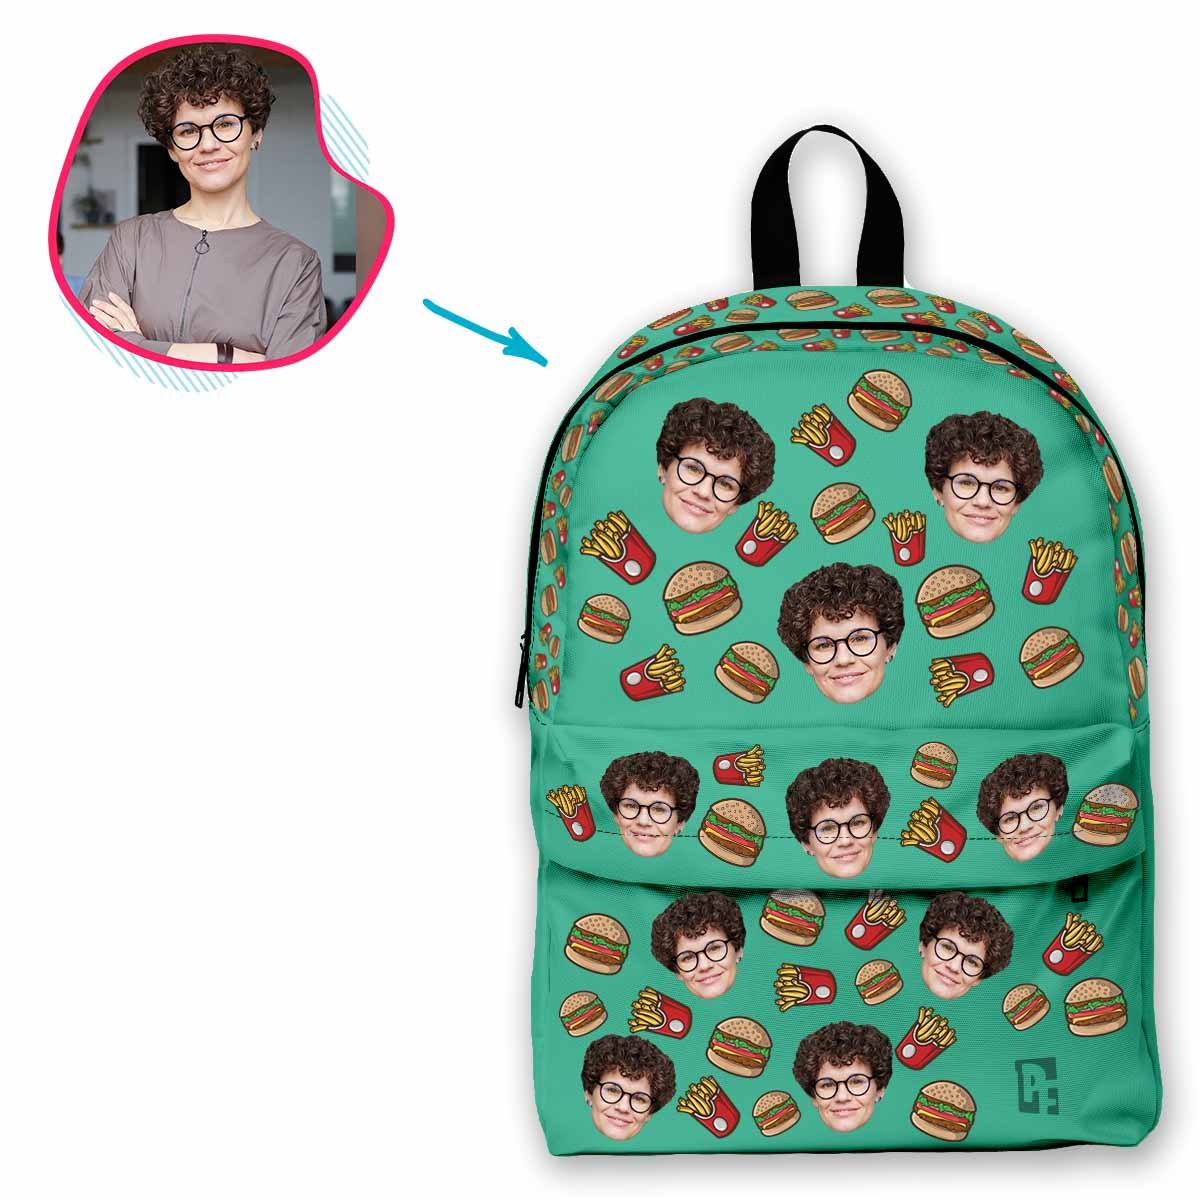 mint Fastfood classic backpack personalized with photo of face printed on it